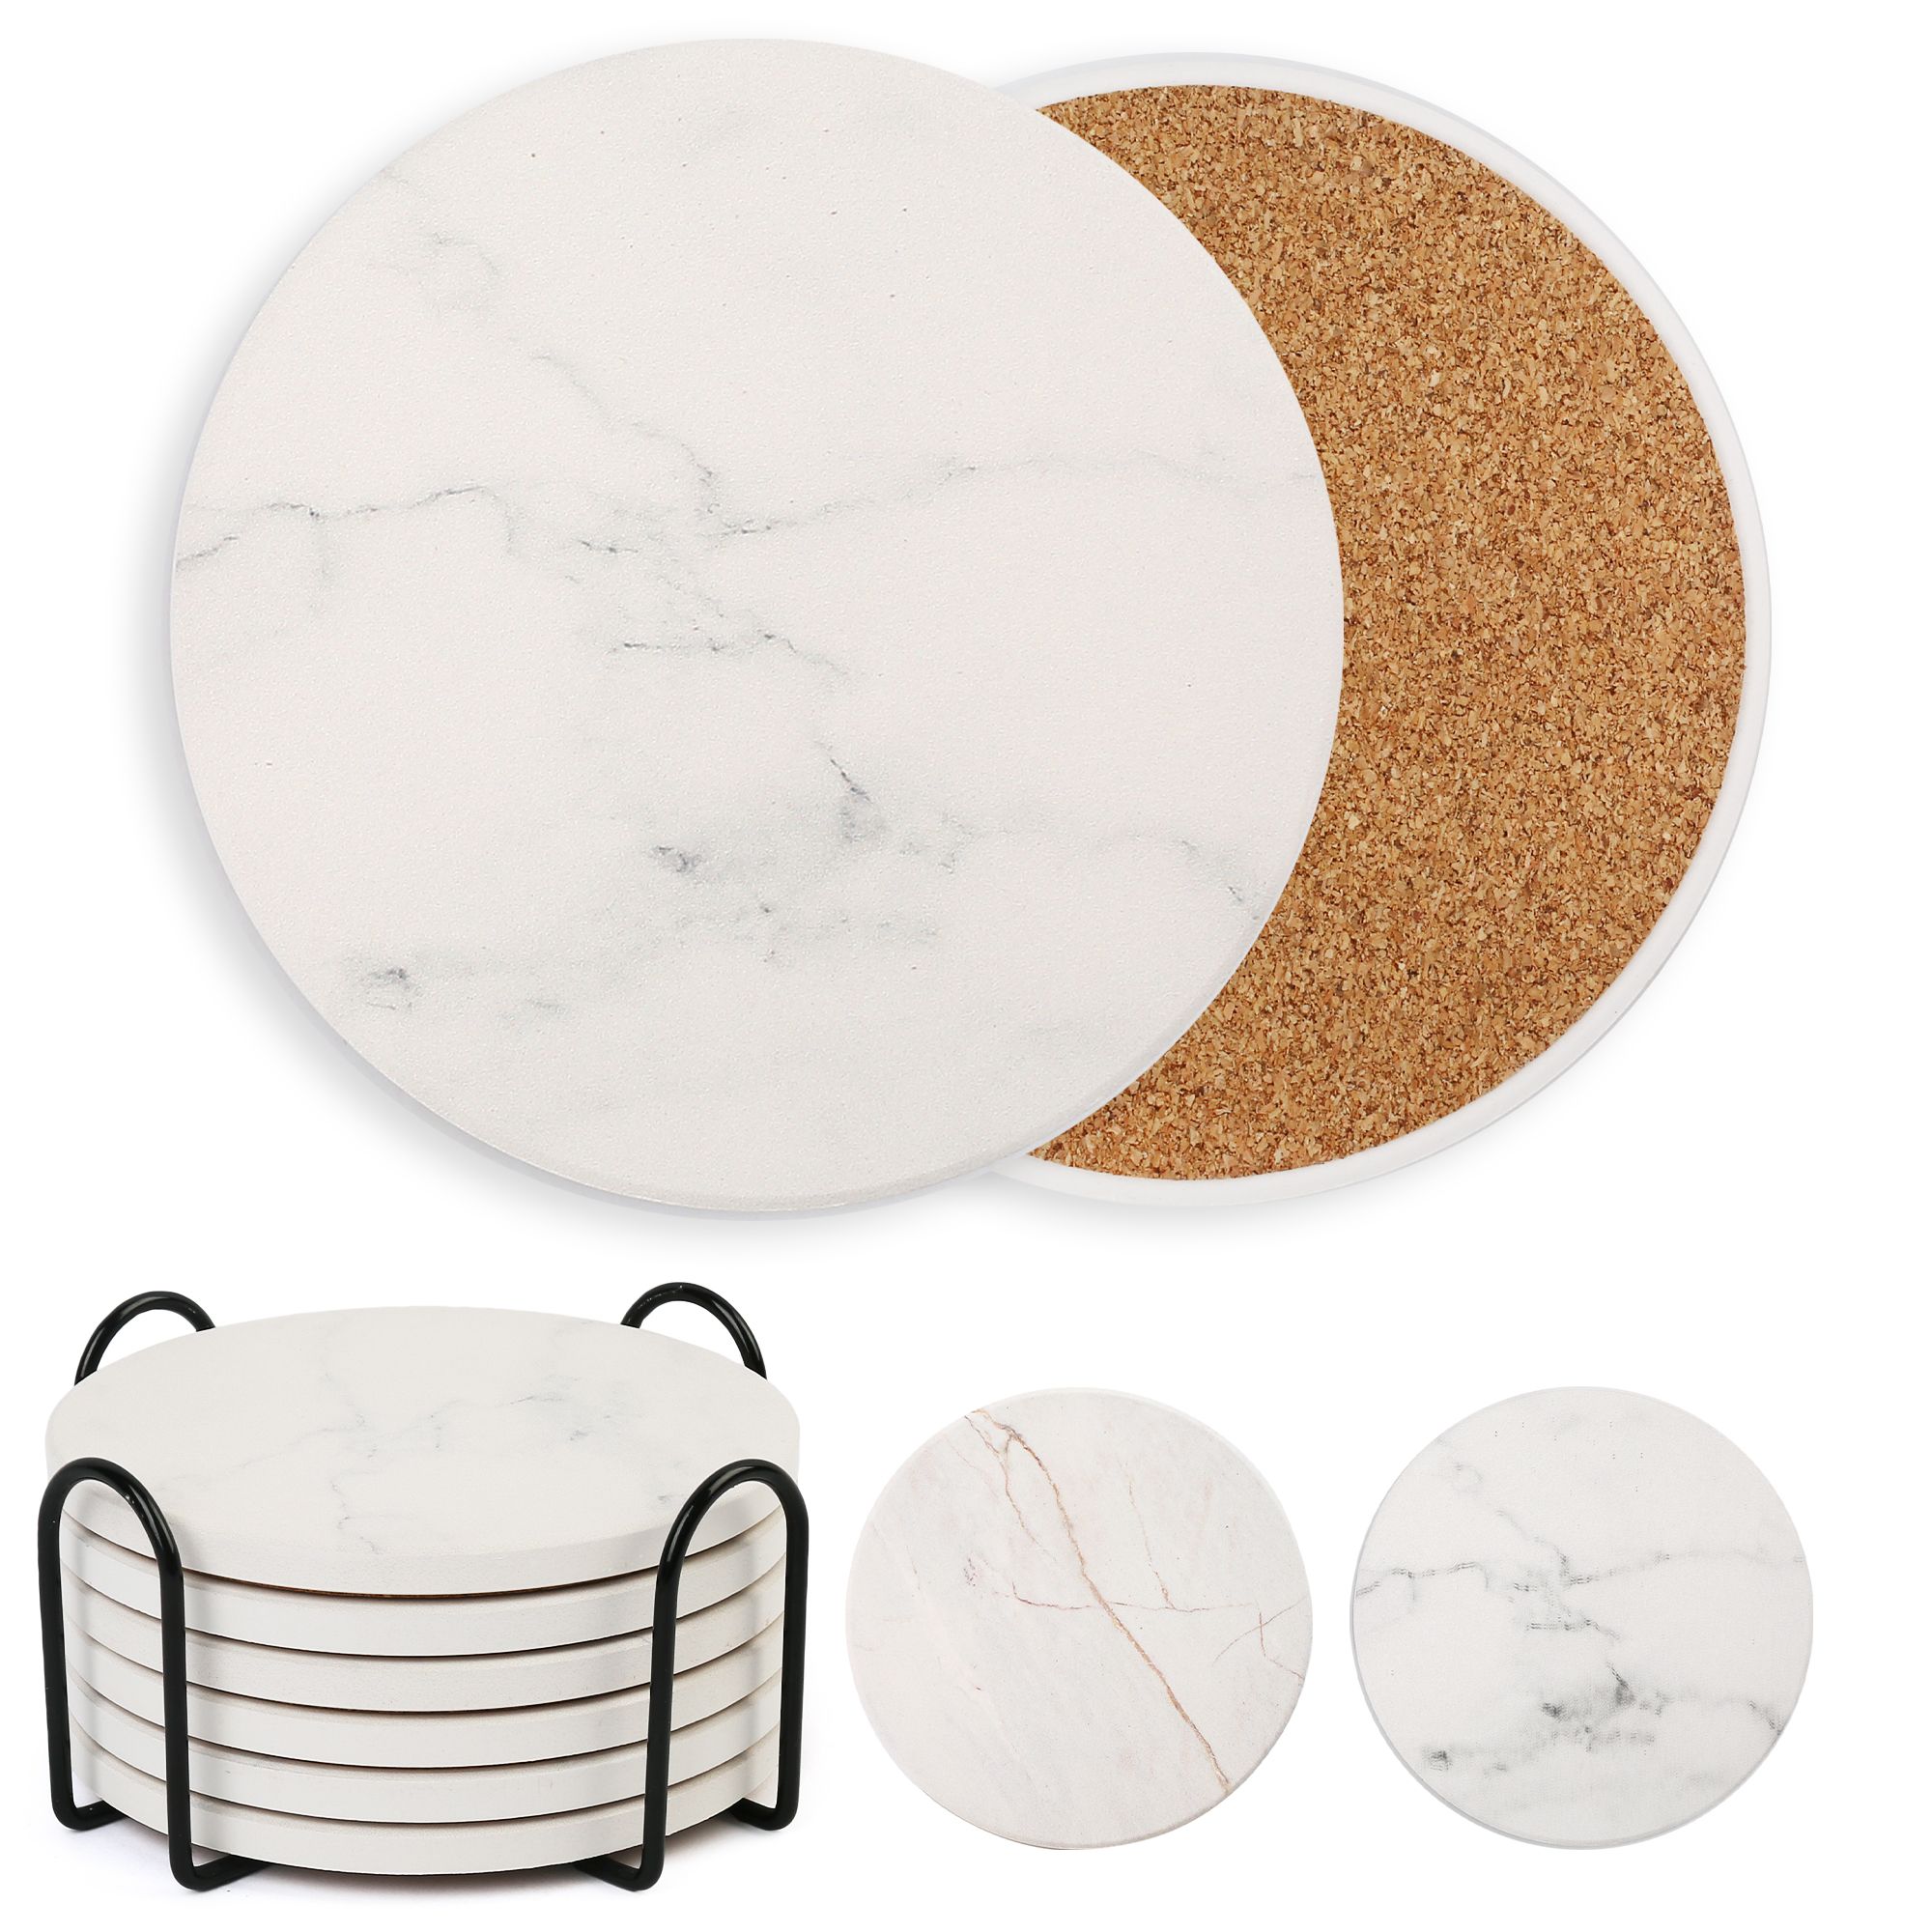 LotFancy 6Pcs 4 in Round Ceramic Coasters for Drinks Absorbent with Holder, Beige, Non-Slip - image 1 of 7